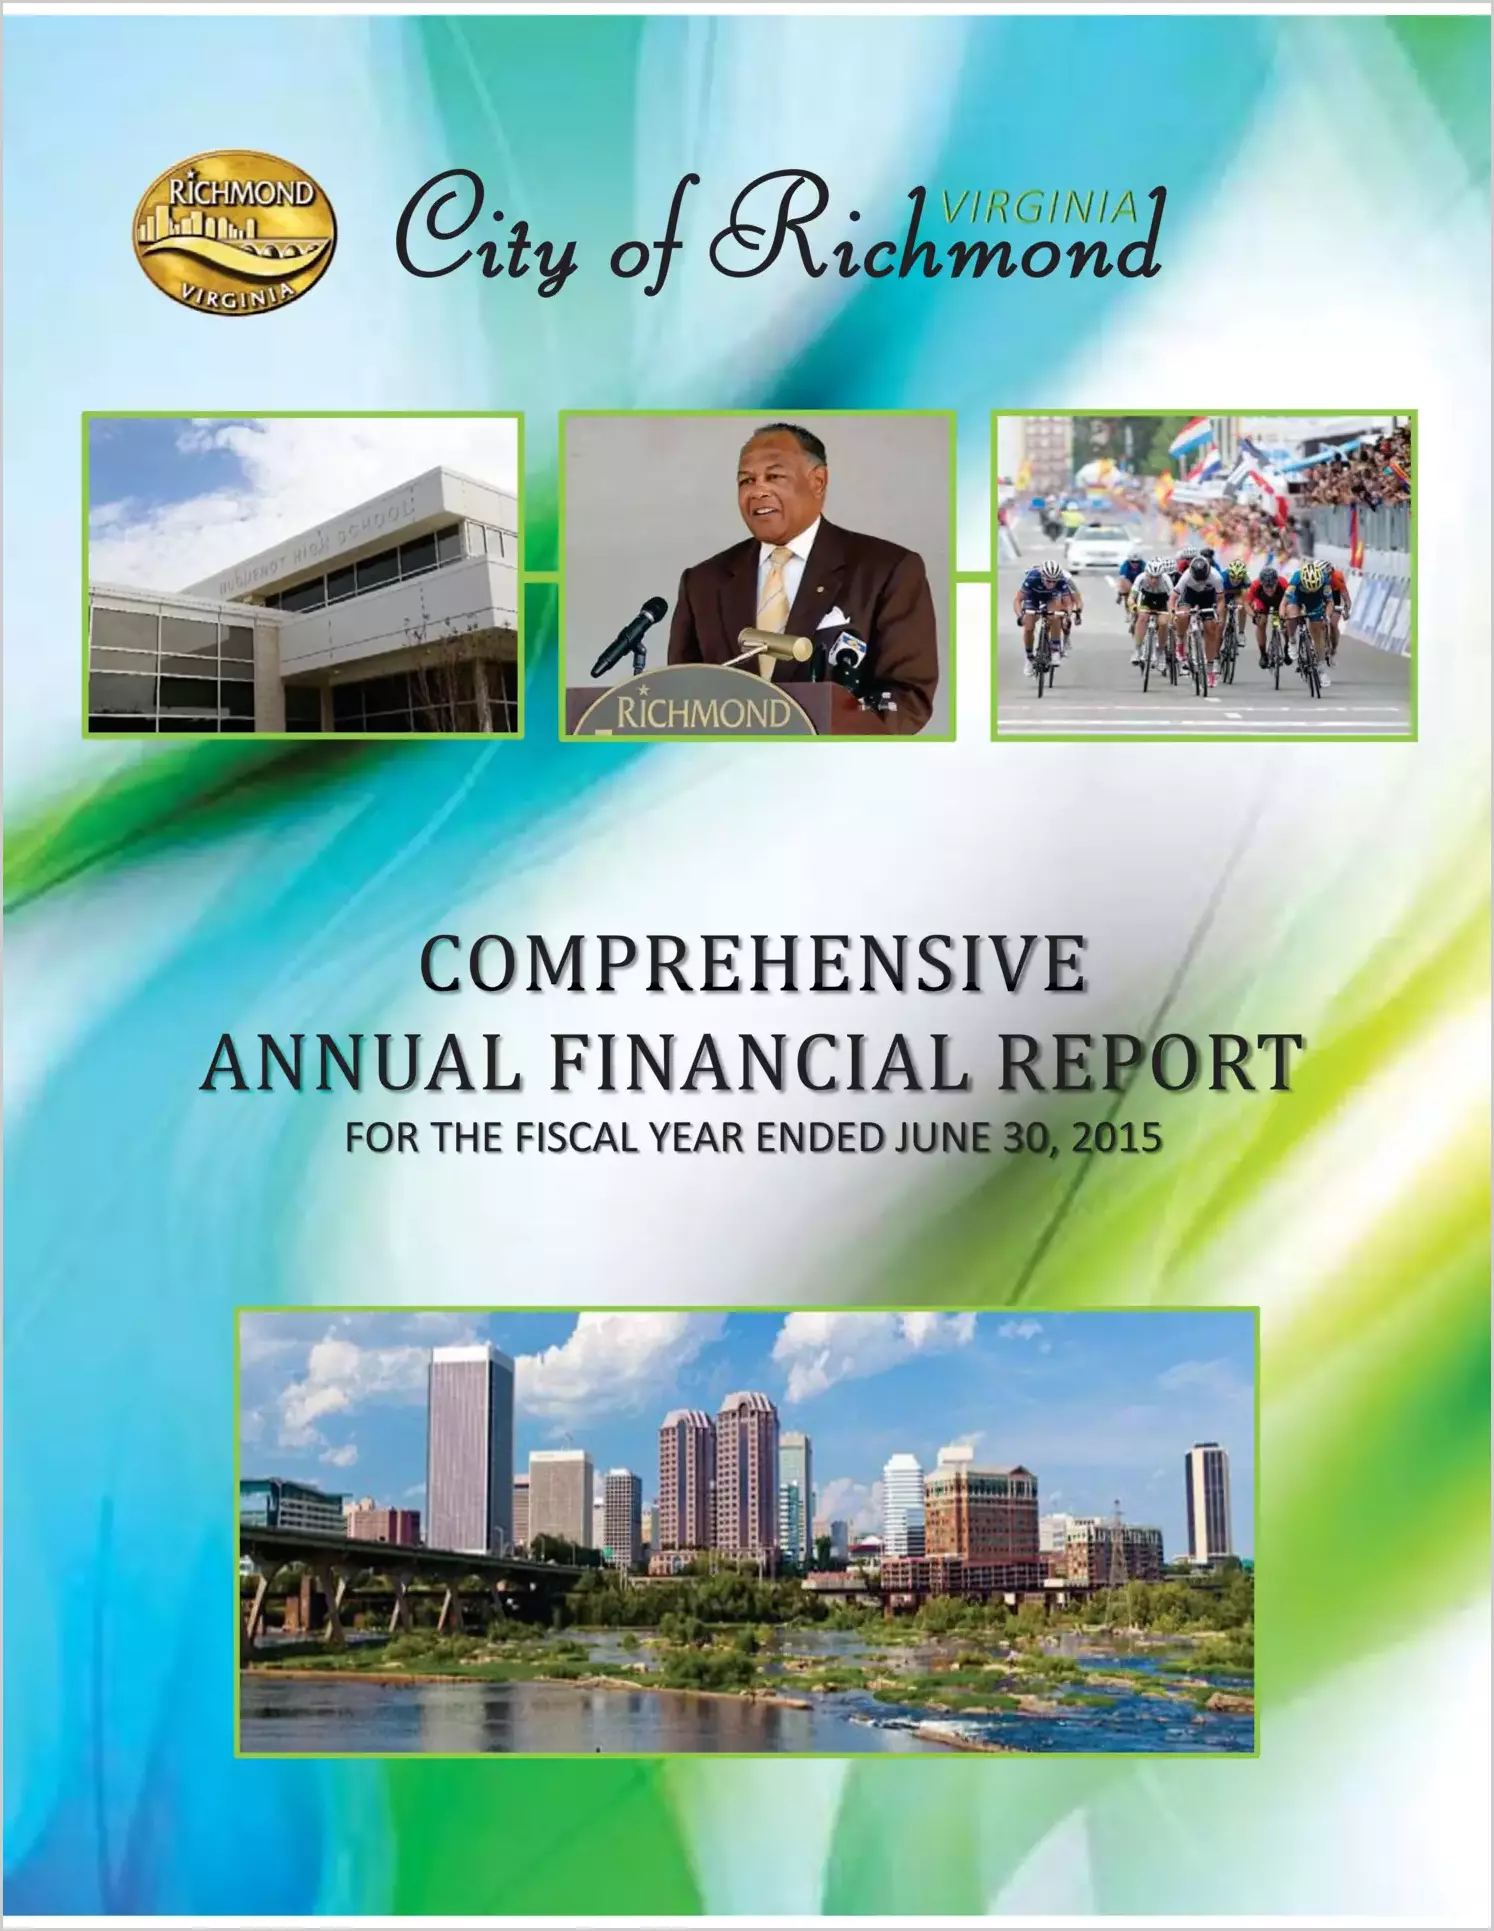 2015 Annual Financial Report for City of Richmond